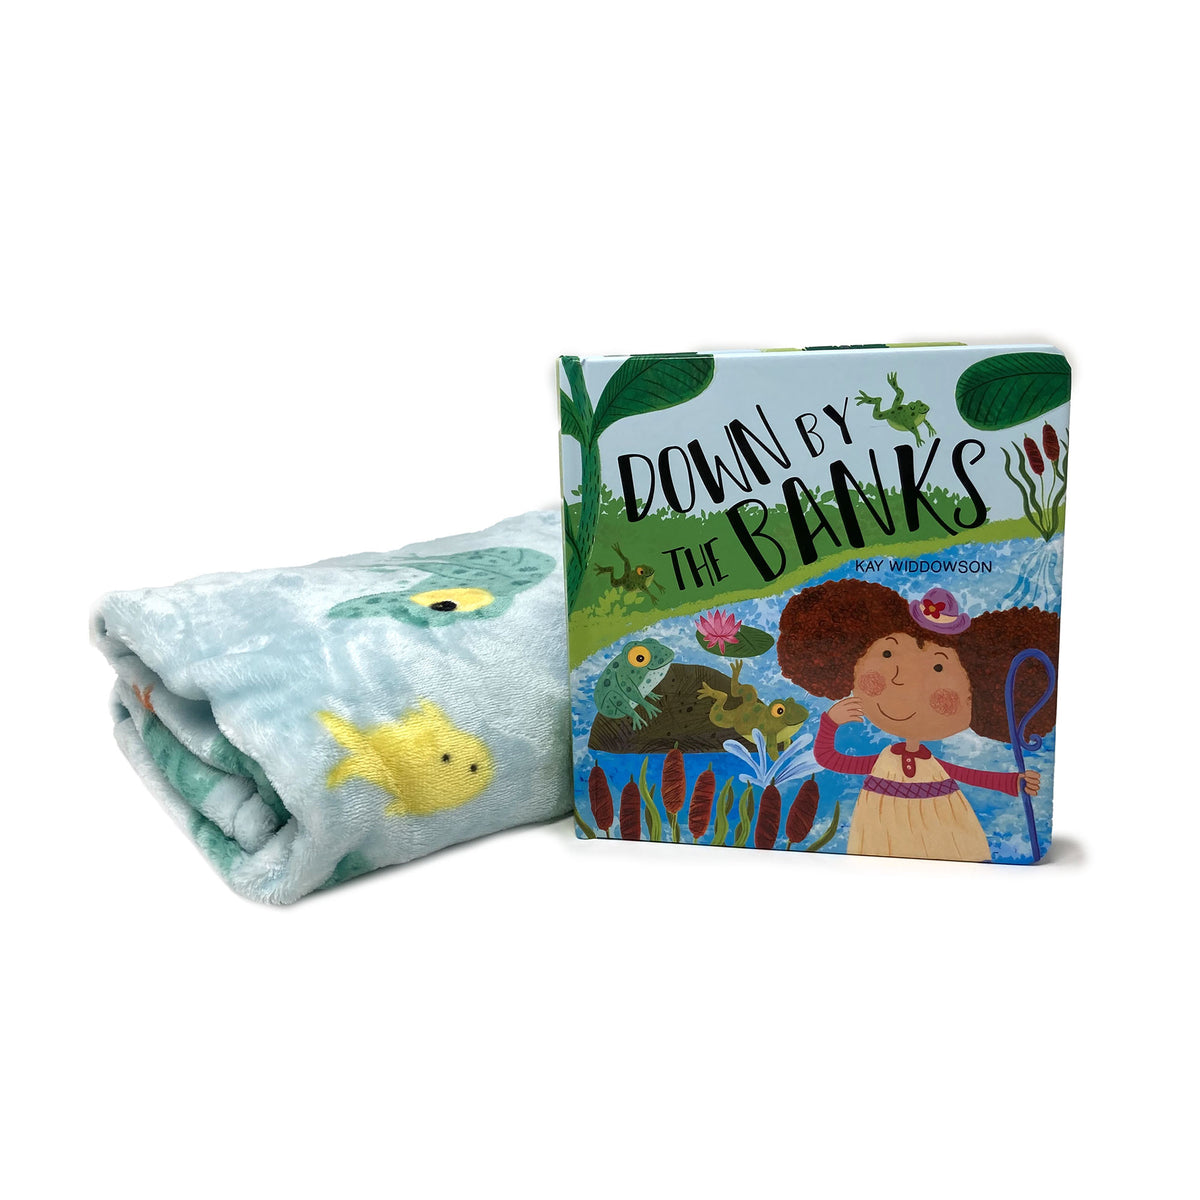 Down By the banks - Binks &amp; Books Blanket and Book Gift Set